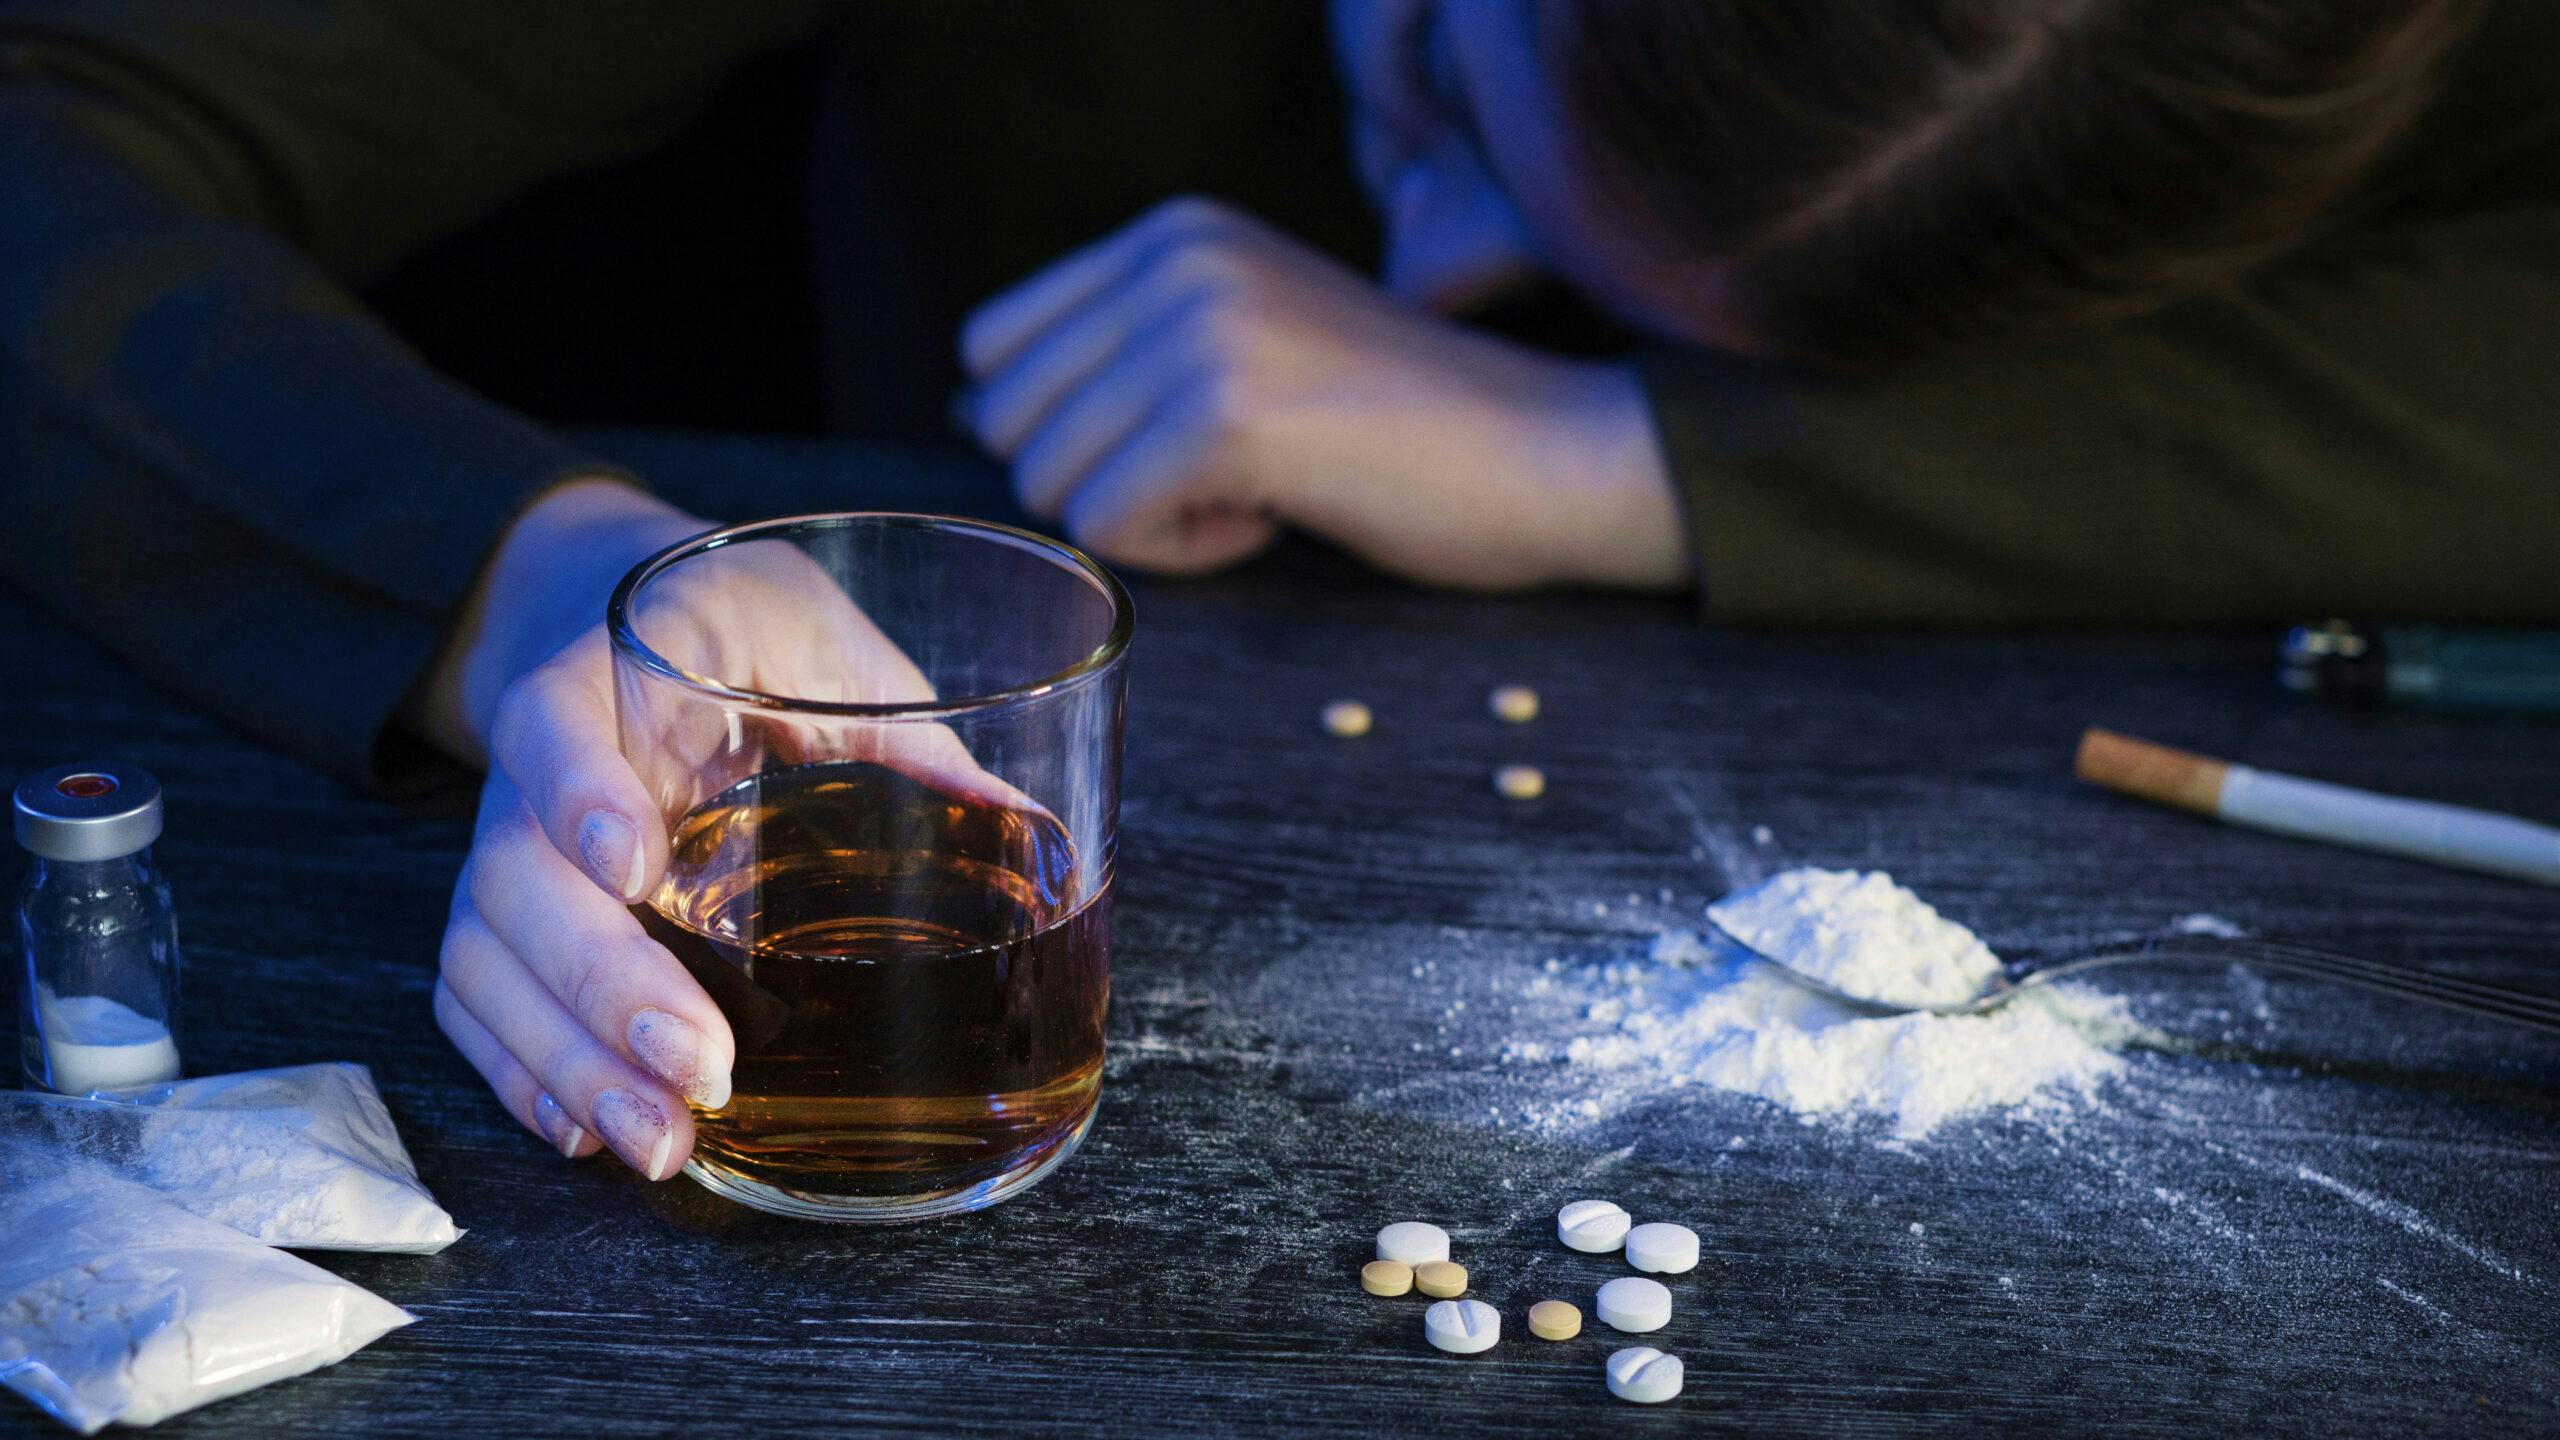 person laying down drinking liquor with powder drug and pills